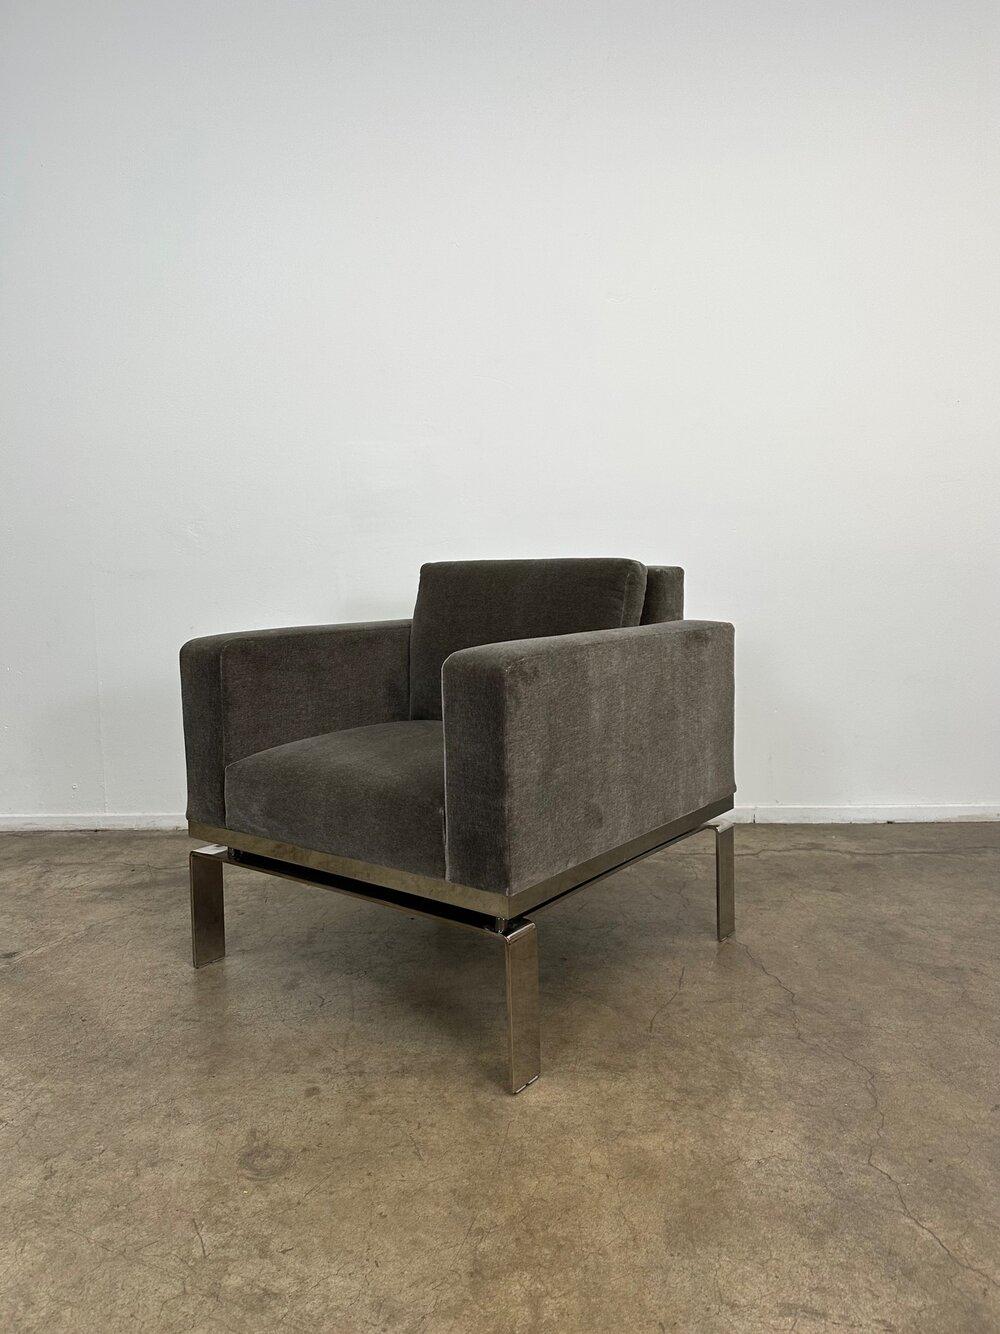 American Contemporary Chrome and Mohair Lounge Chair by Martin Bratrud Series One